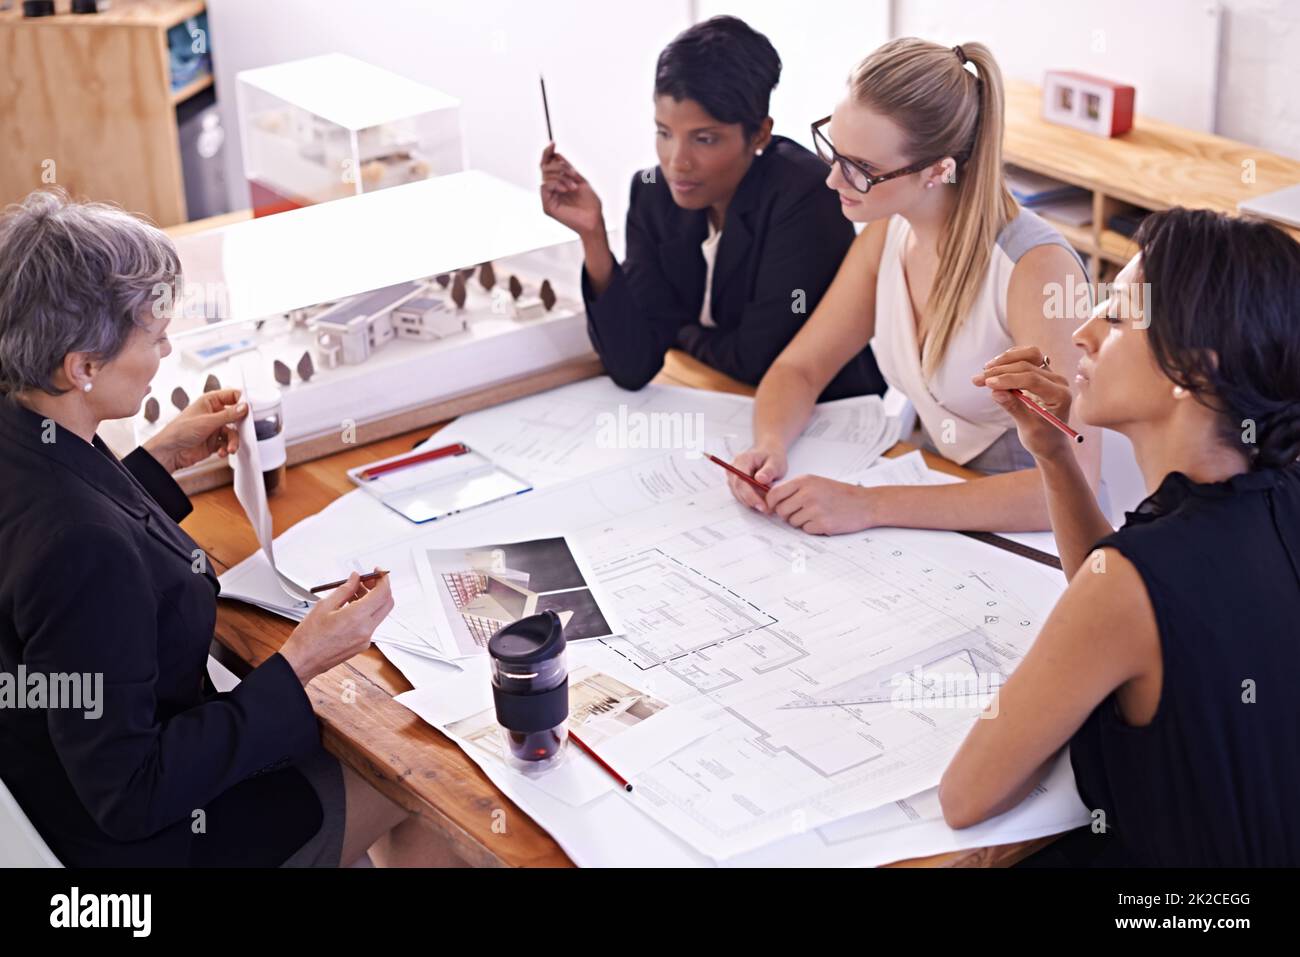 Meeting of the minds. A group of female architects working together on a project at a conference table. Stock Photo